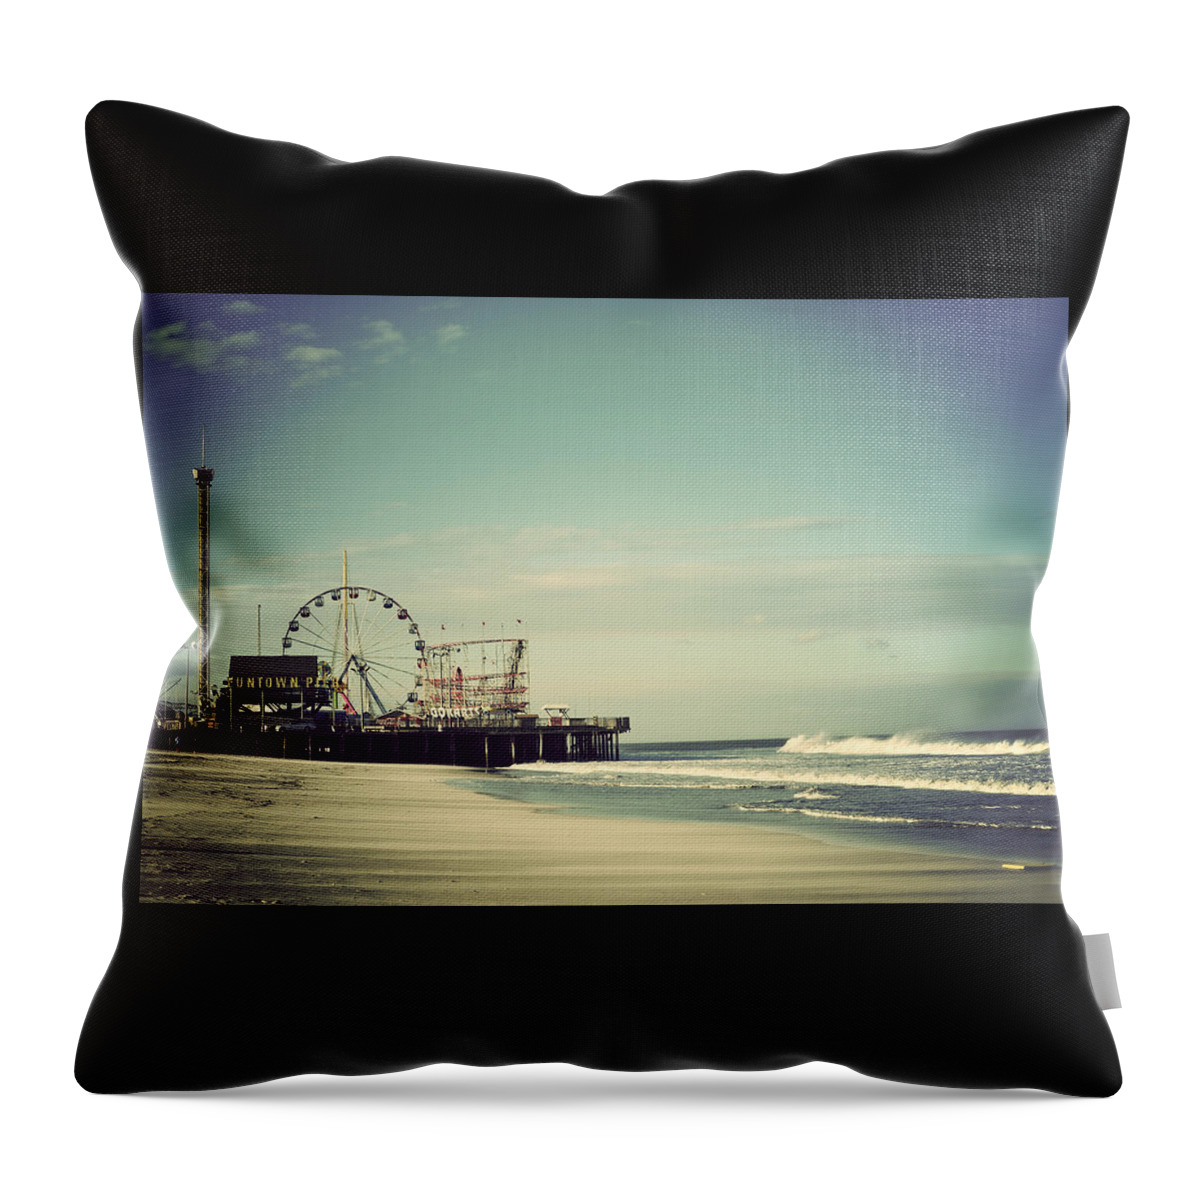 Funtown Pier Throw Pillow featuring the photograph Funtown Pier Seaside Heights New Jersey Vintage by Terry DeLuco